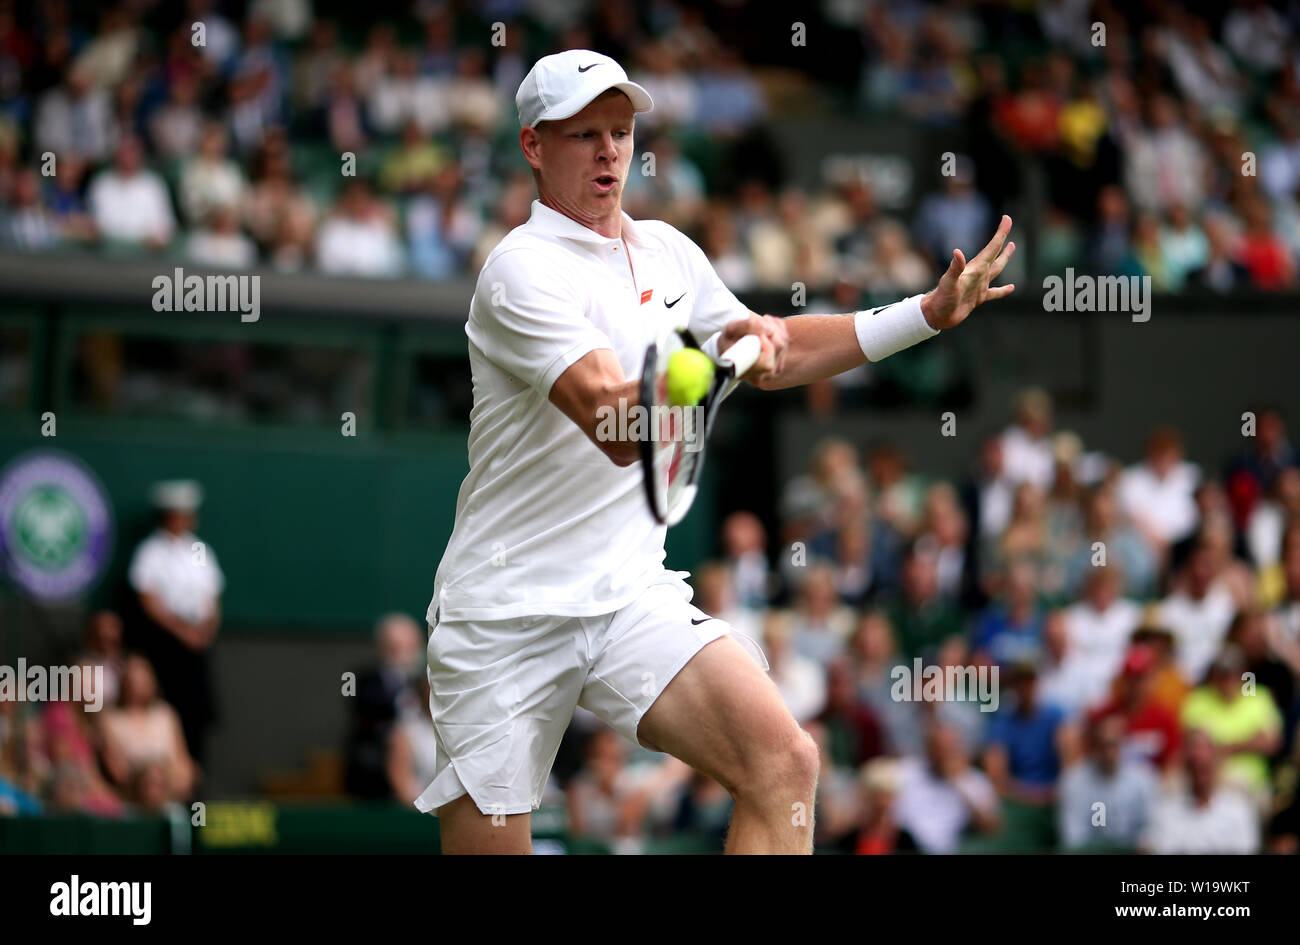 Kyle Edmund in action against Jaume Munar on day one of the Wimbledon Championships at the All England Lawn Tennis and Croquet Club, Wimbledon. Stock Photo